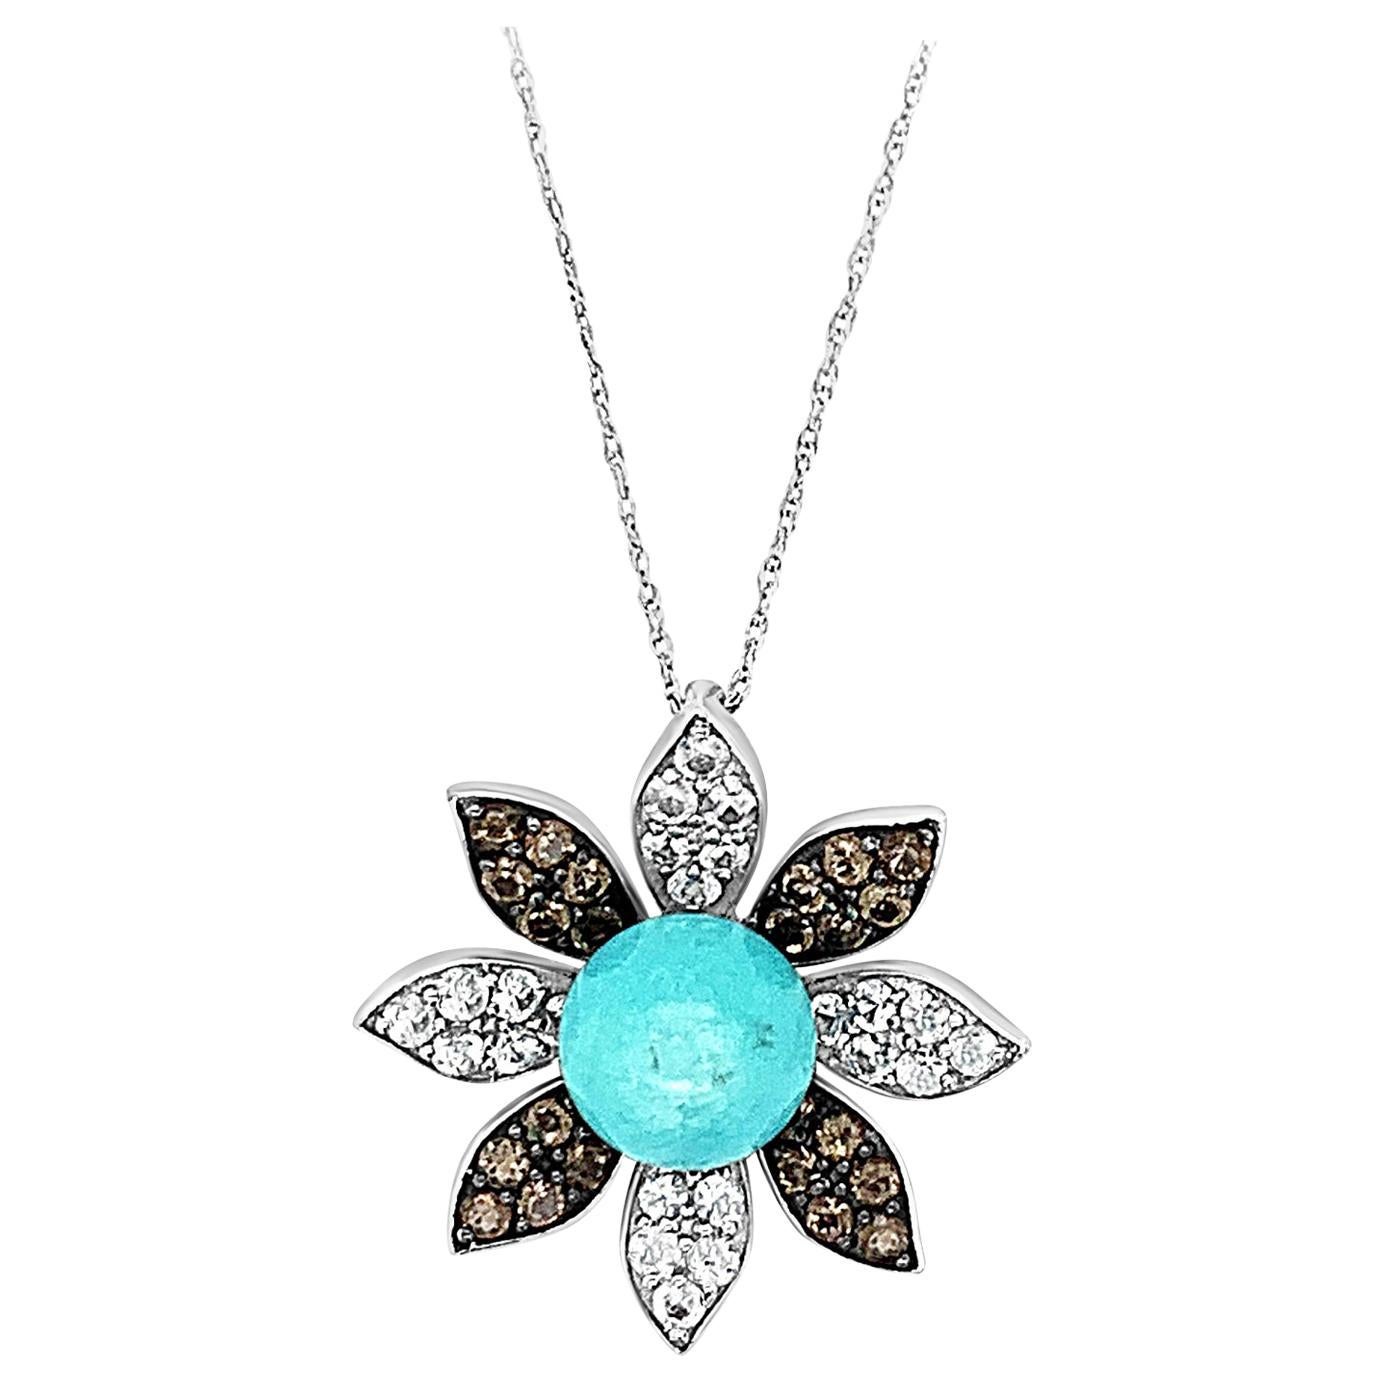 Carlo Viani 14 Karat White Gold Flower Shaped Round Turquoise Pendant Necklace For Sale